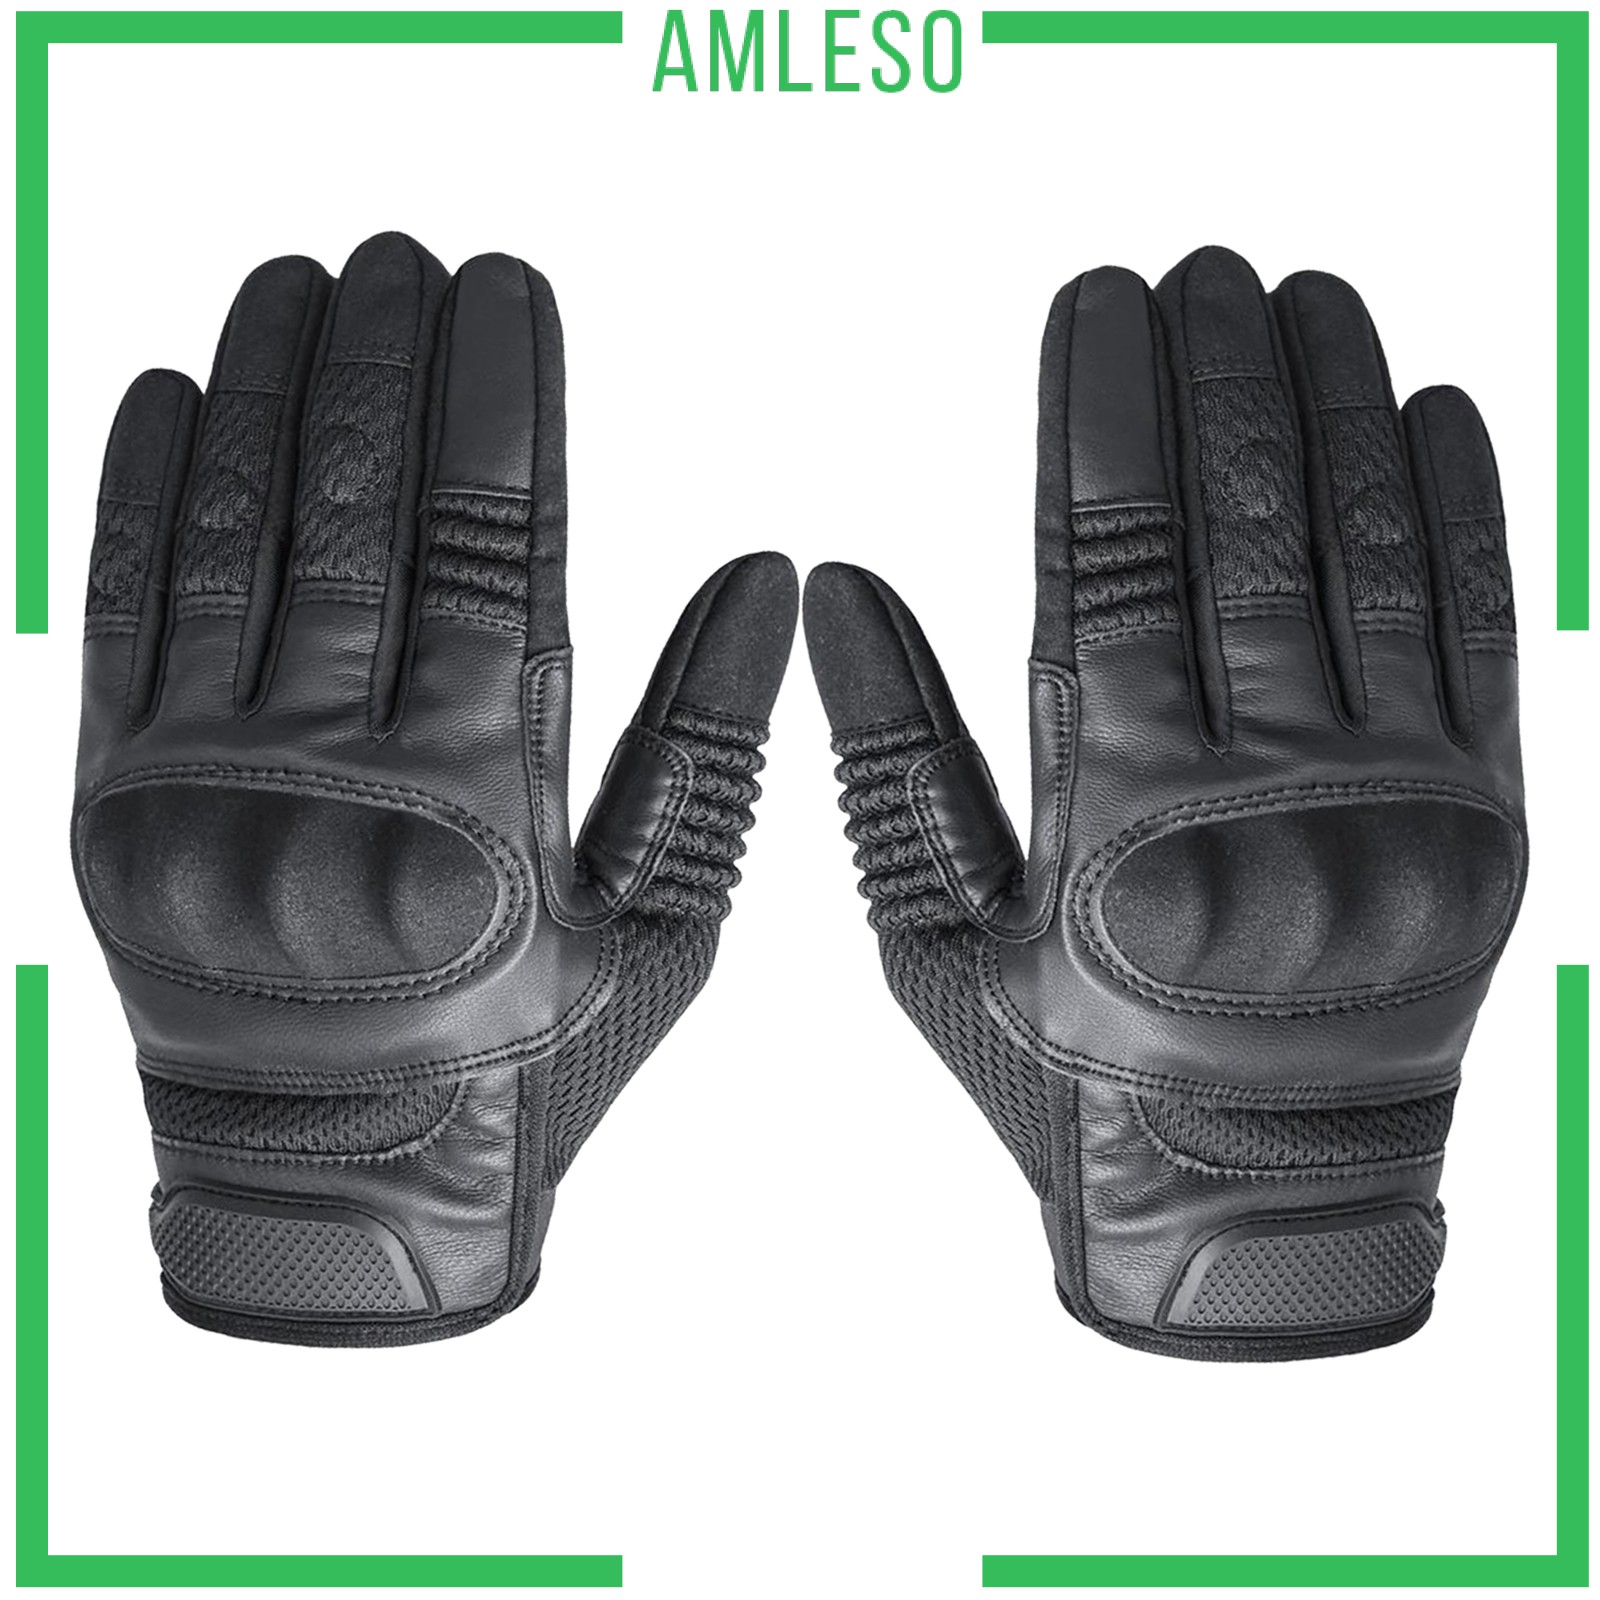 [AMLESO] 2xWinter Thermal Ski Gloves Touchscreen Waterproof Snow Motorcycle Gloves Male